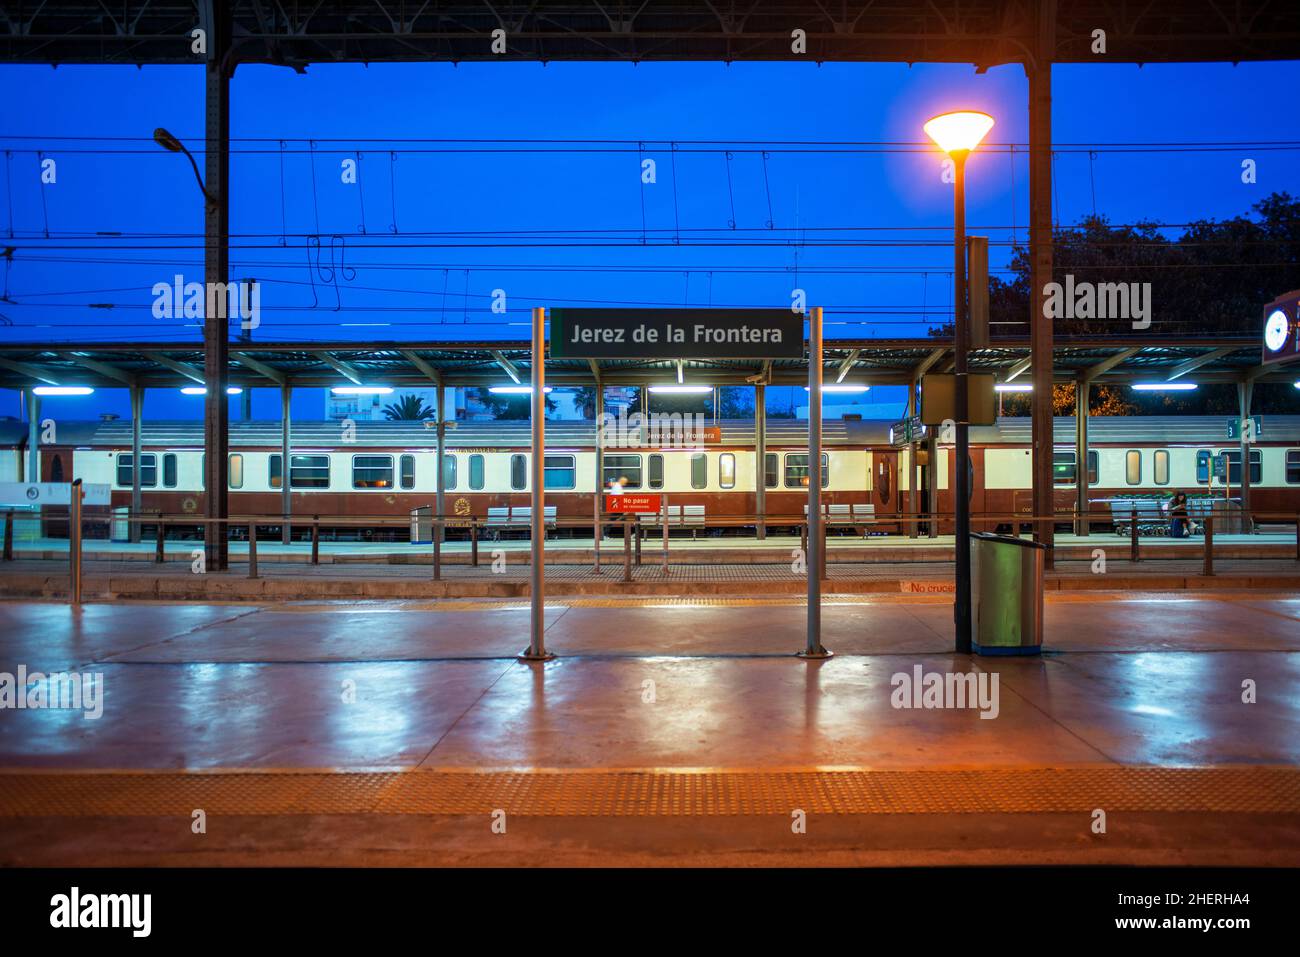 Al-Andalus luxury train stoped at platform railway in Jerez ce la Frontera train station. This train travell around Andalusia Spain.  The Al Andalus t Stock Photo